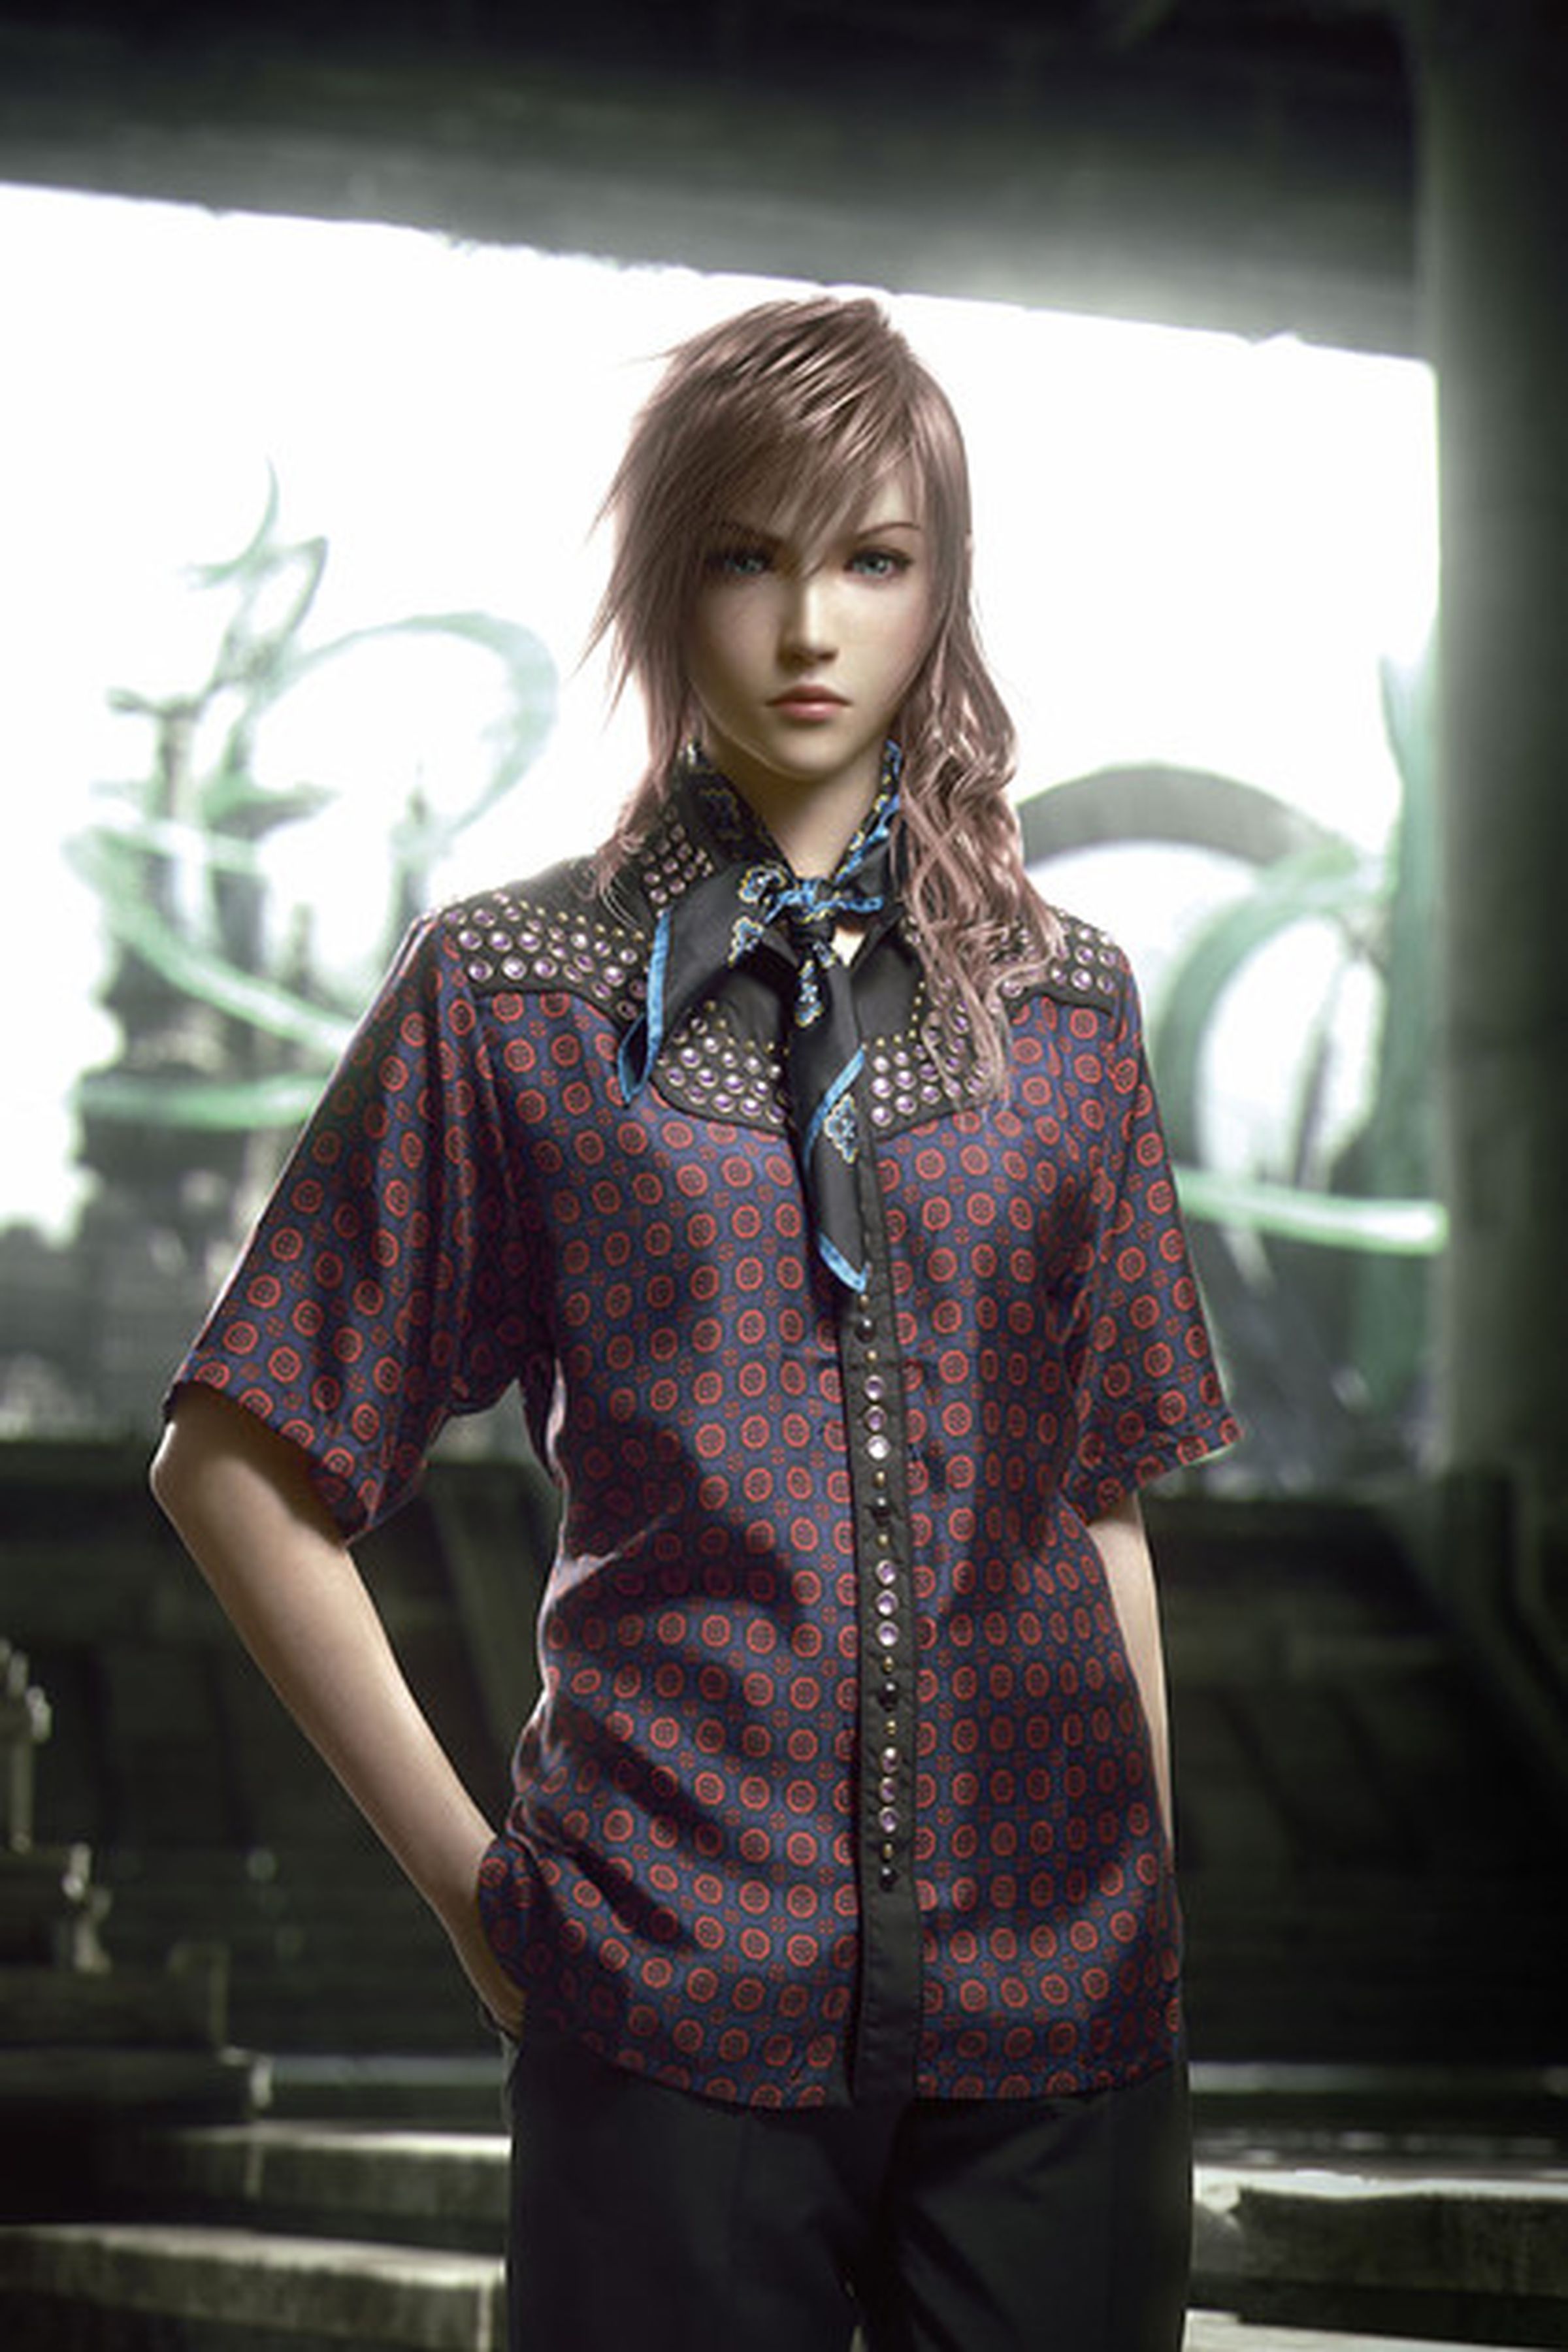 Prada-clad Final Fantasy characters in Arena Homme+